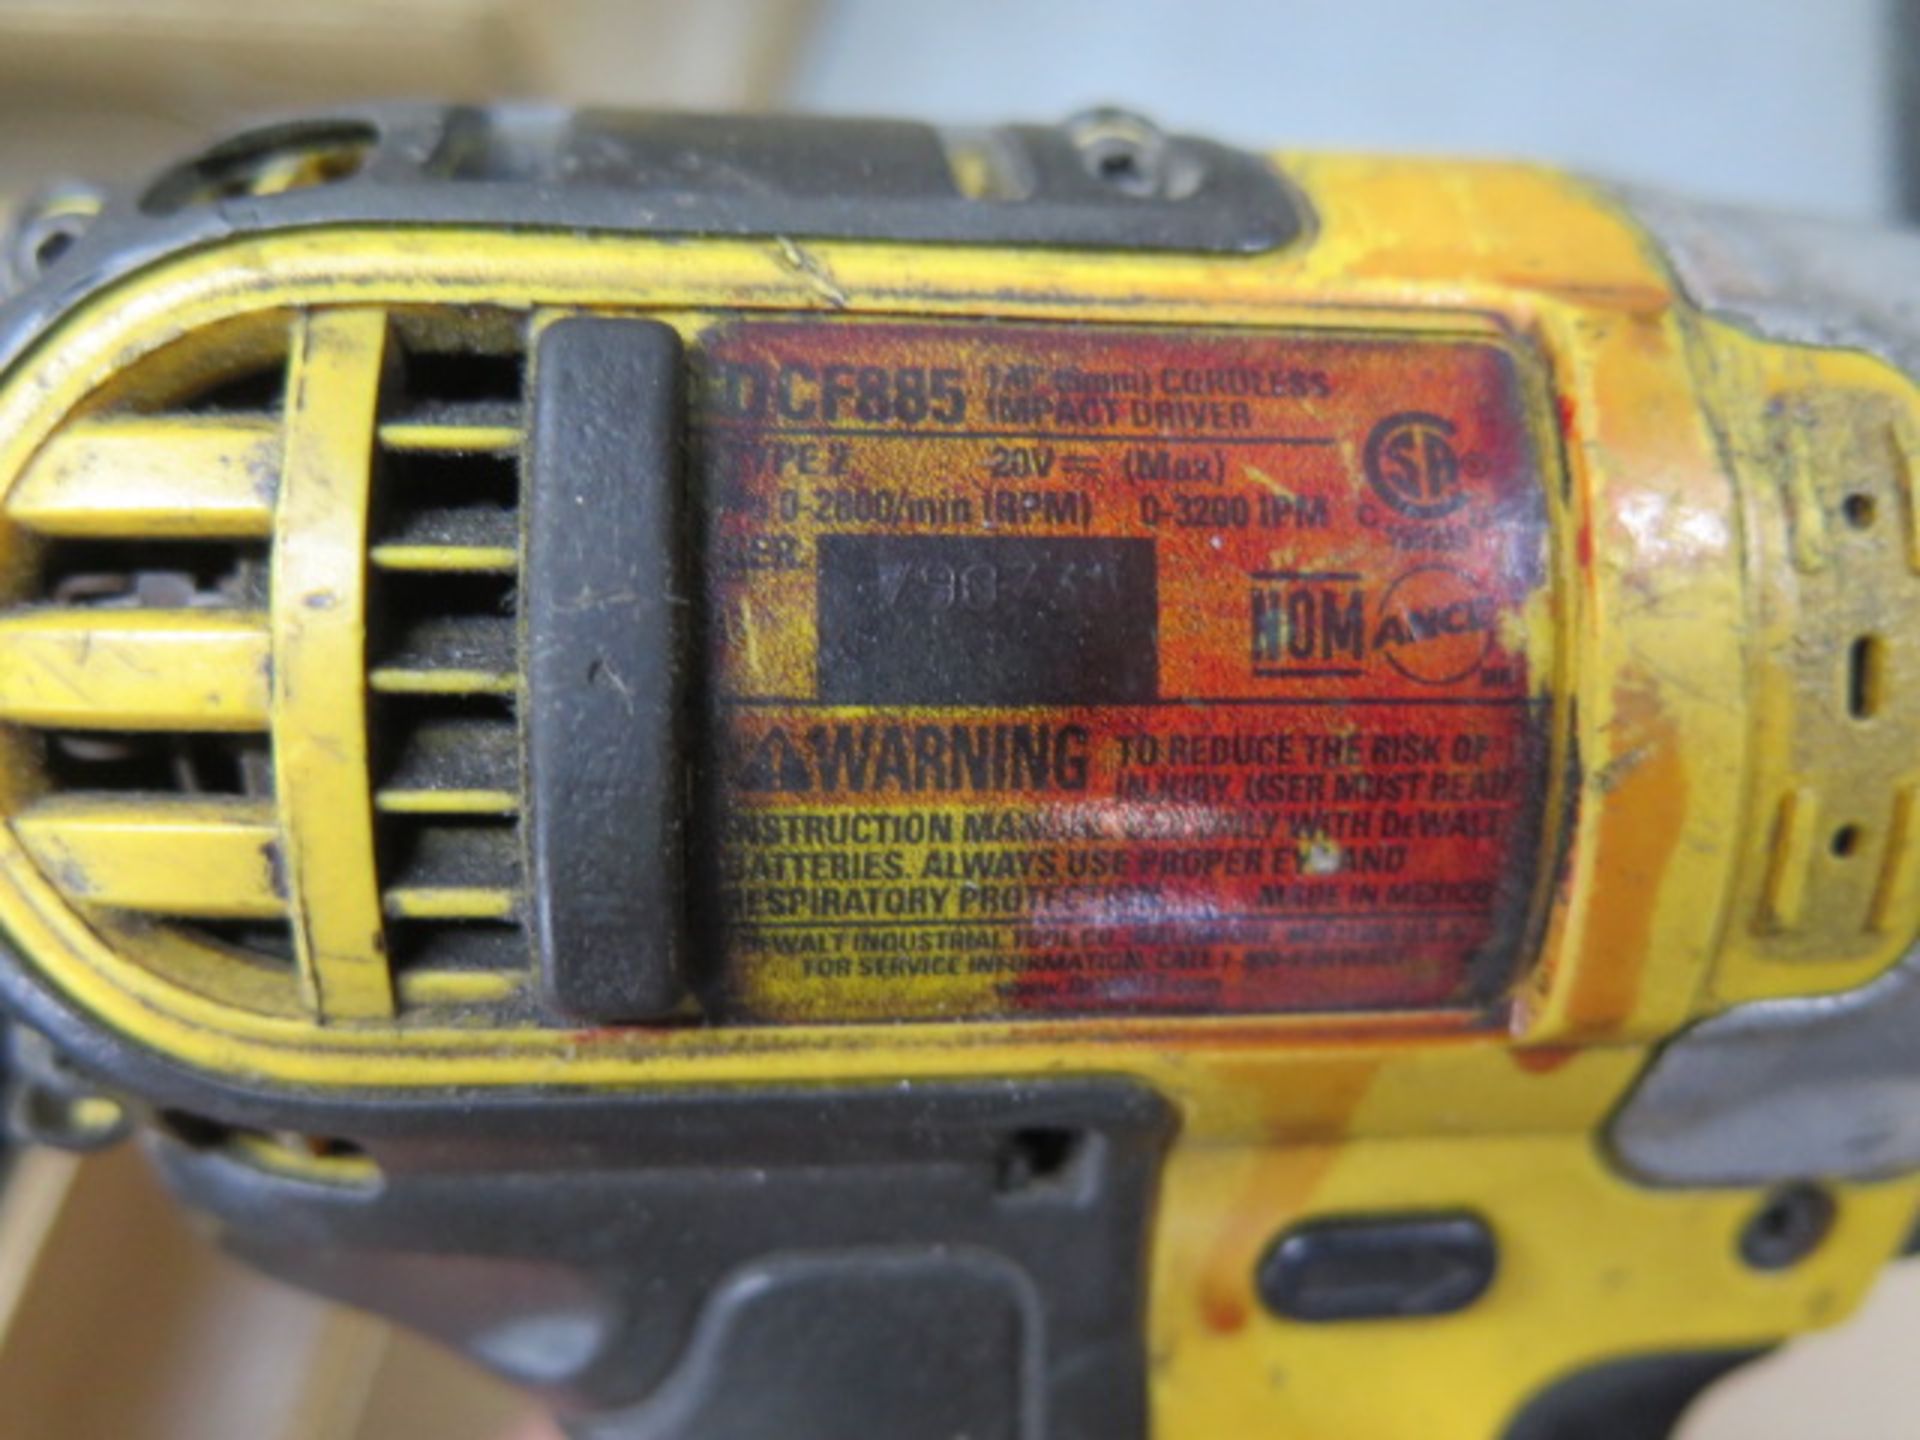 DeWalt 20 Volt Cardless Nut Driver w/ Charger (SOLD AS-IS - NO WARRANTY) - Image 4 of 4